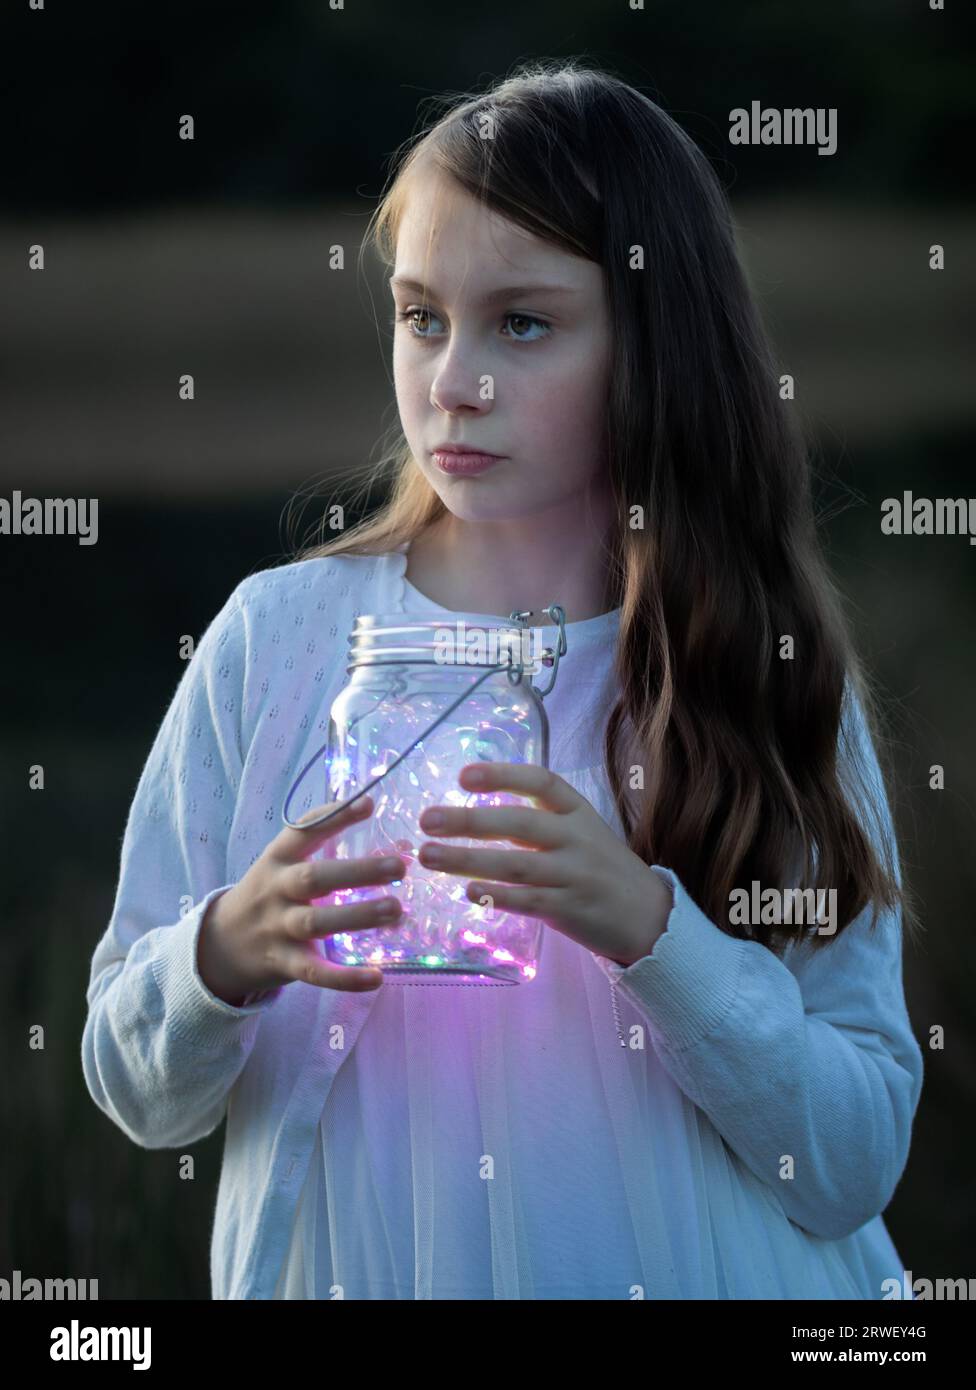 Close-up portrait of a young girl holding a glass jar with fairy lights at dusk looking to the side Stock Photo